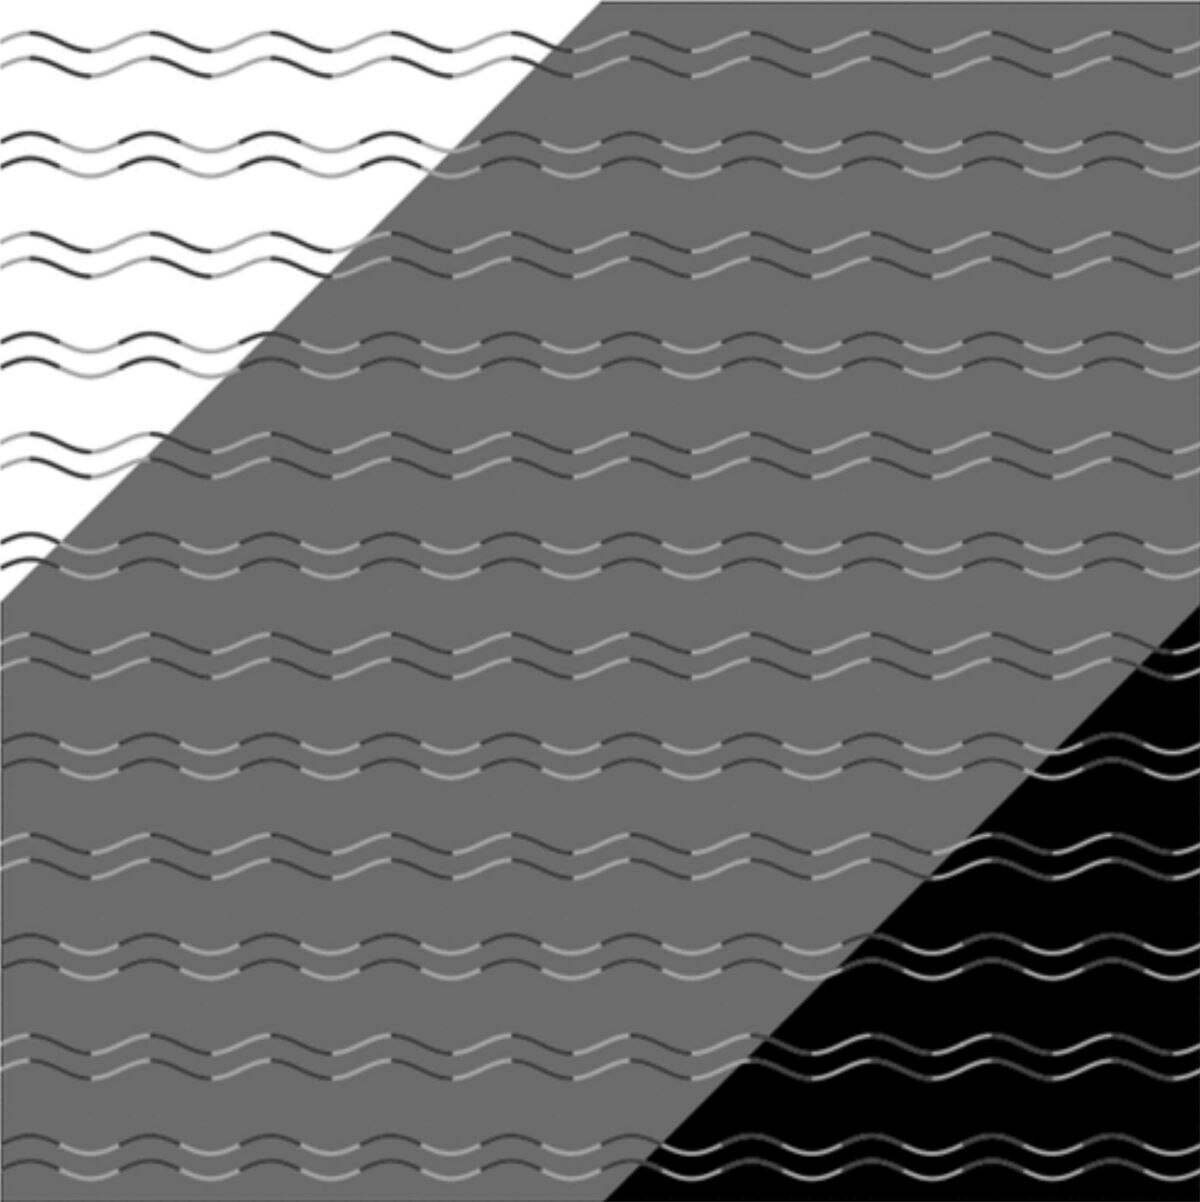 An optical illusion created by Kohske Takahashi: All the lines are smoothly curving sine waves, but their shading and contrast with the background makes them appear to be sharp zigzags. Credit: Kohske Takahashi